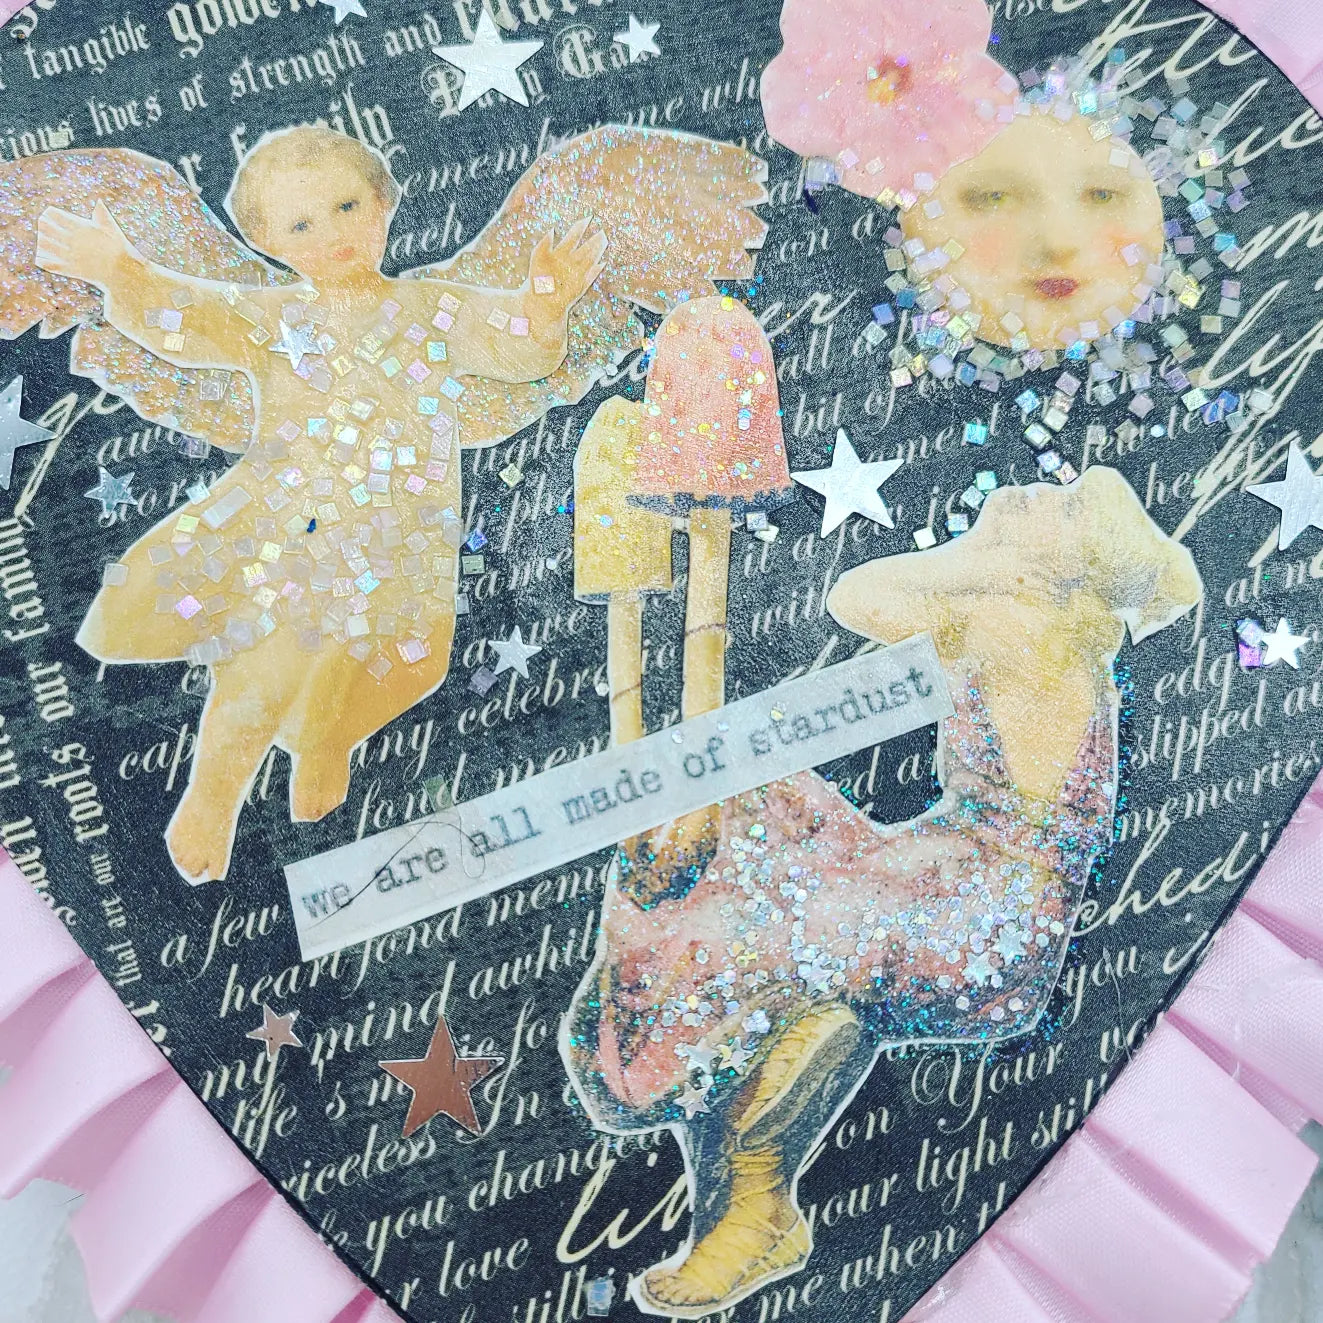 We Are All Made of Stardust Collage Mixed Media Heart Shaped Trinket Box ~ Love Magick ~ Filled with Goodies ~ OOAK Box plus Mini Spell Jar, and Crystals ~ Valentine's Day Gift